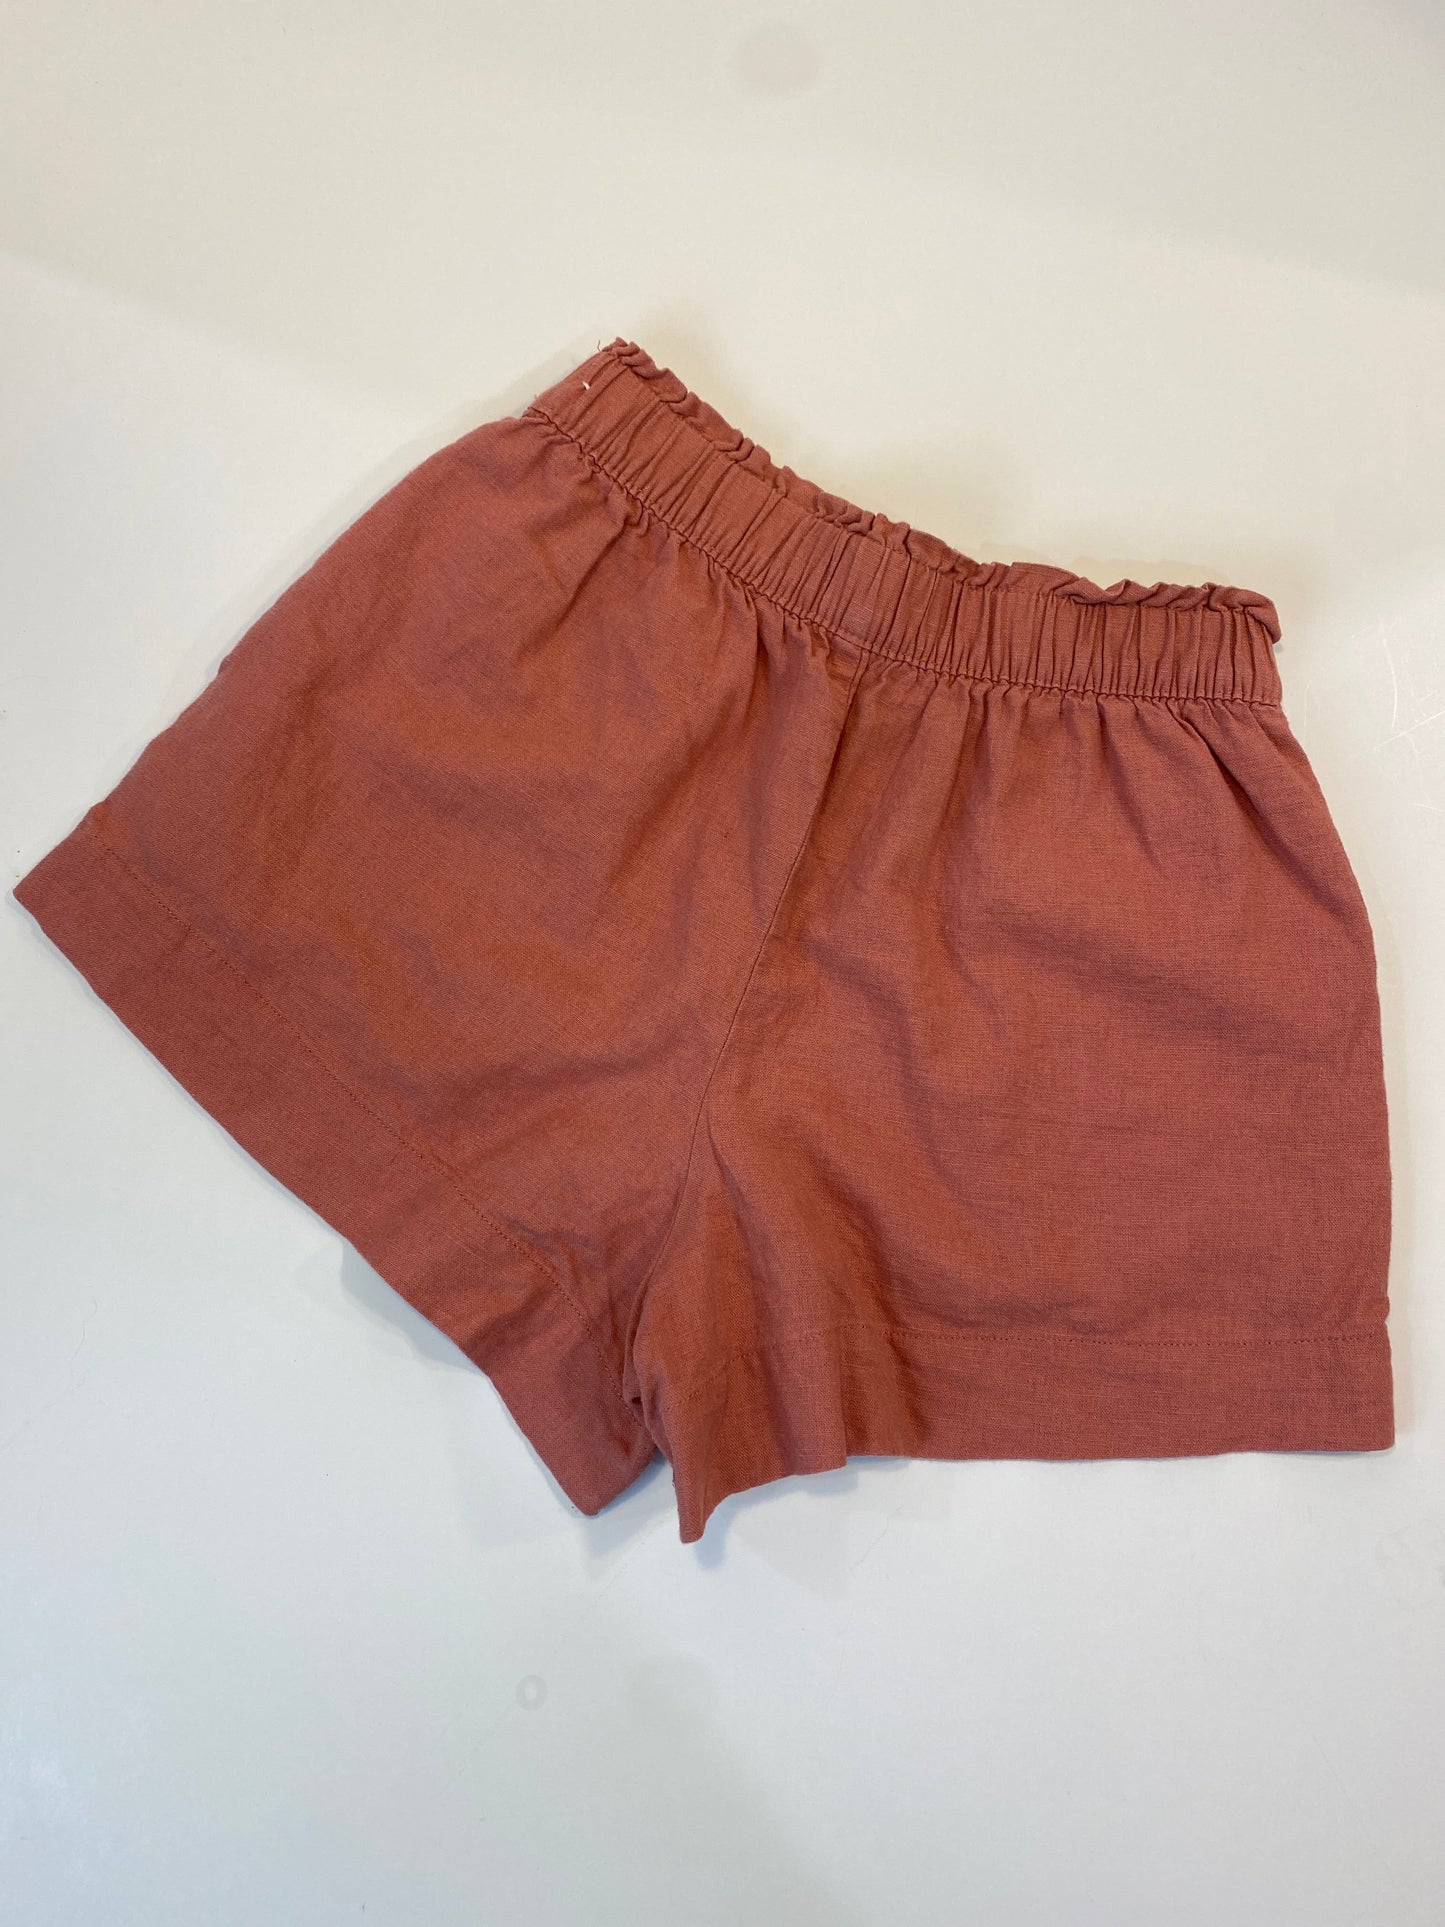 Peach Shorts Abercrombie And Fitch, Size S